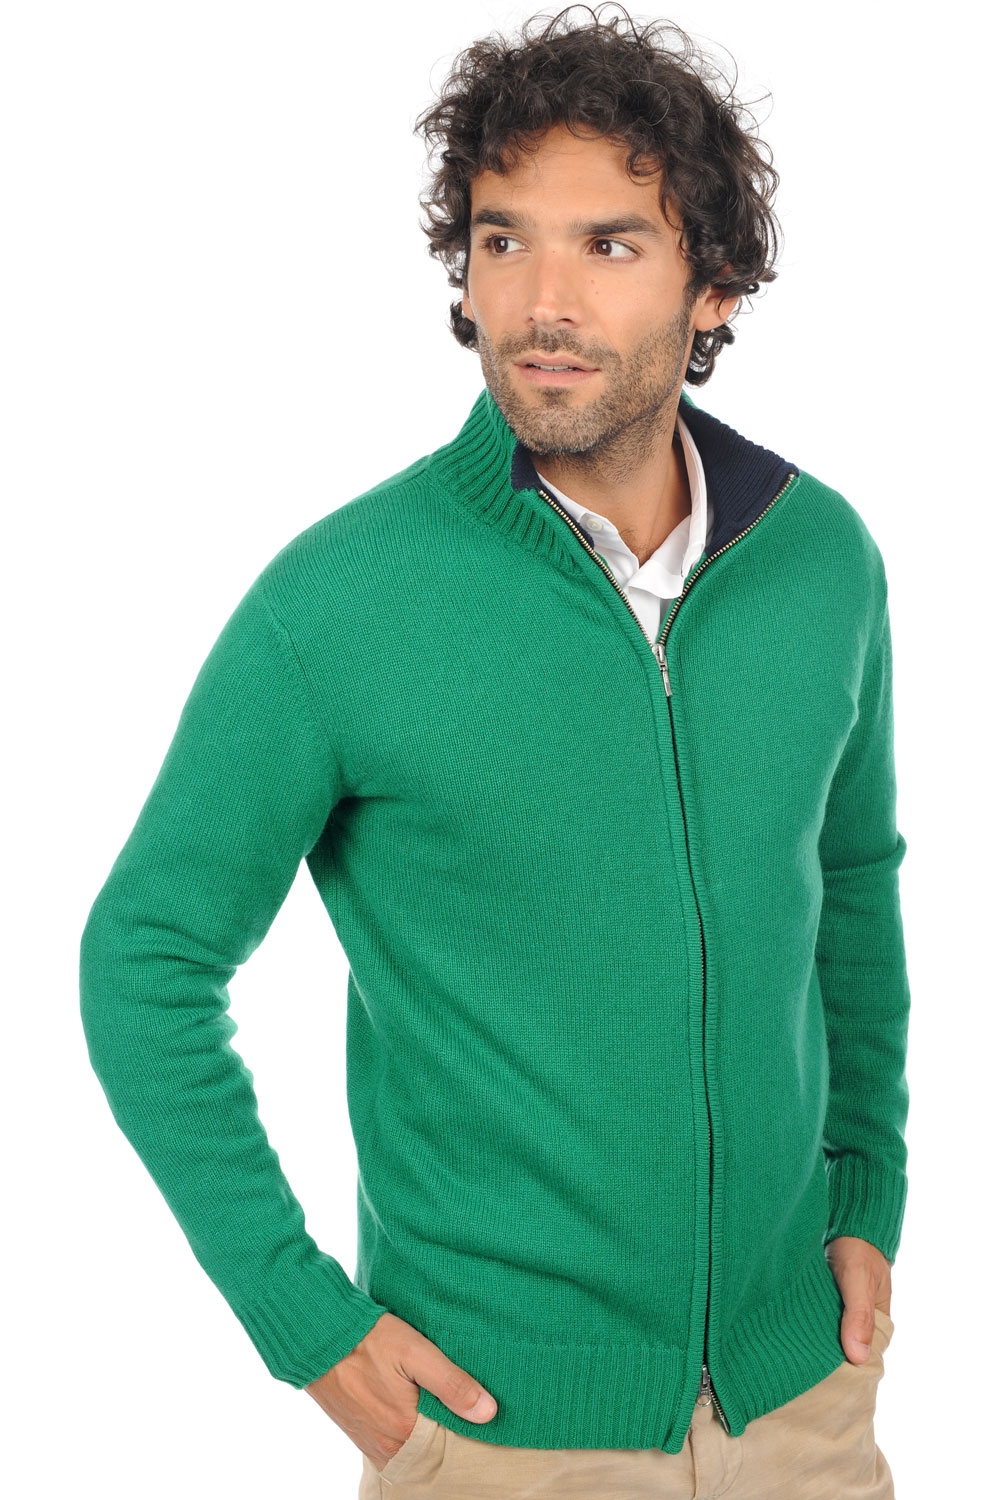 Cachemire pull homme maxime vert anglais marine fonce l